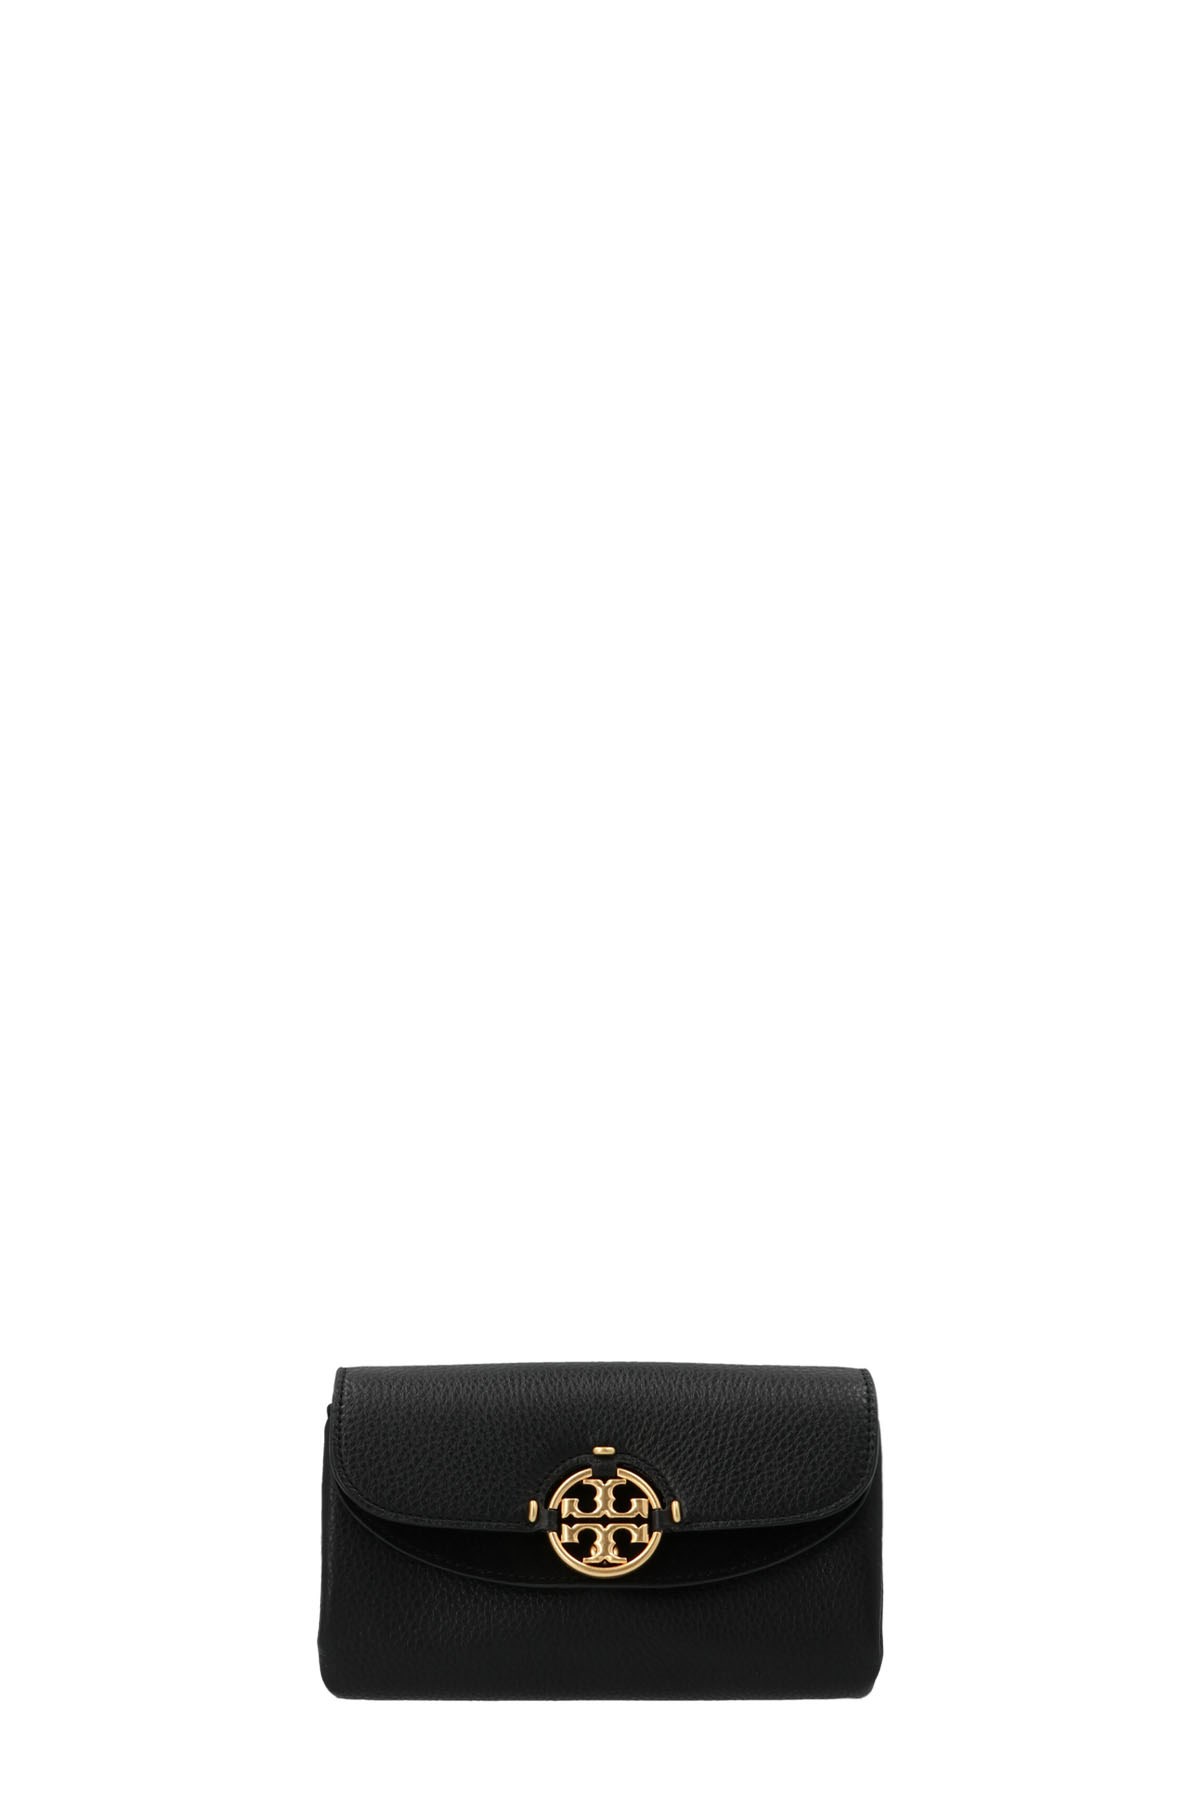 TORY BURCH ‘Miller’ Wallet On Chain